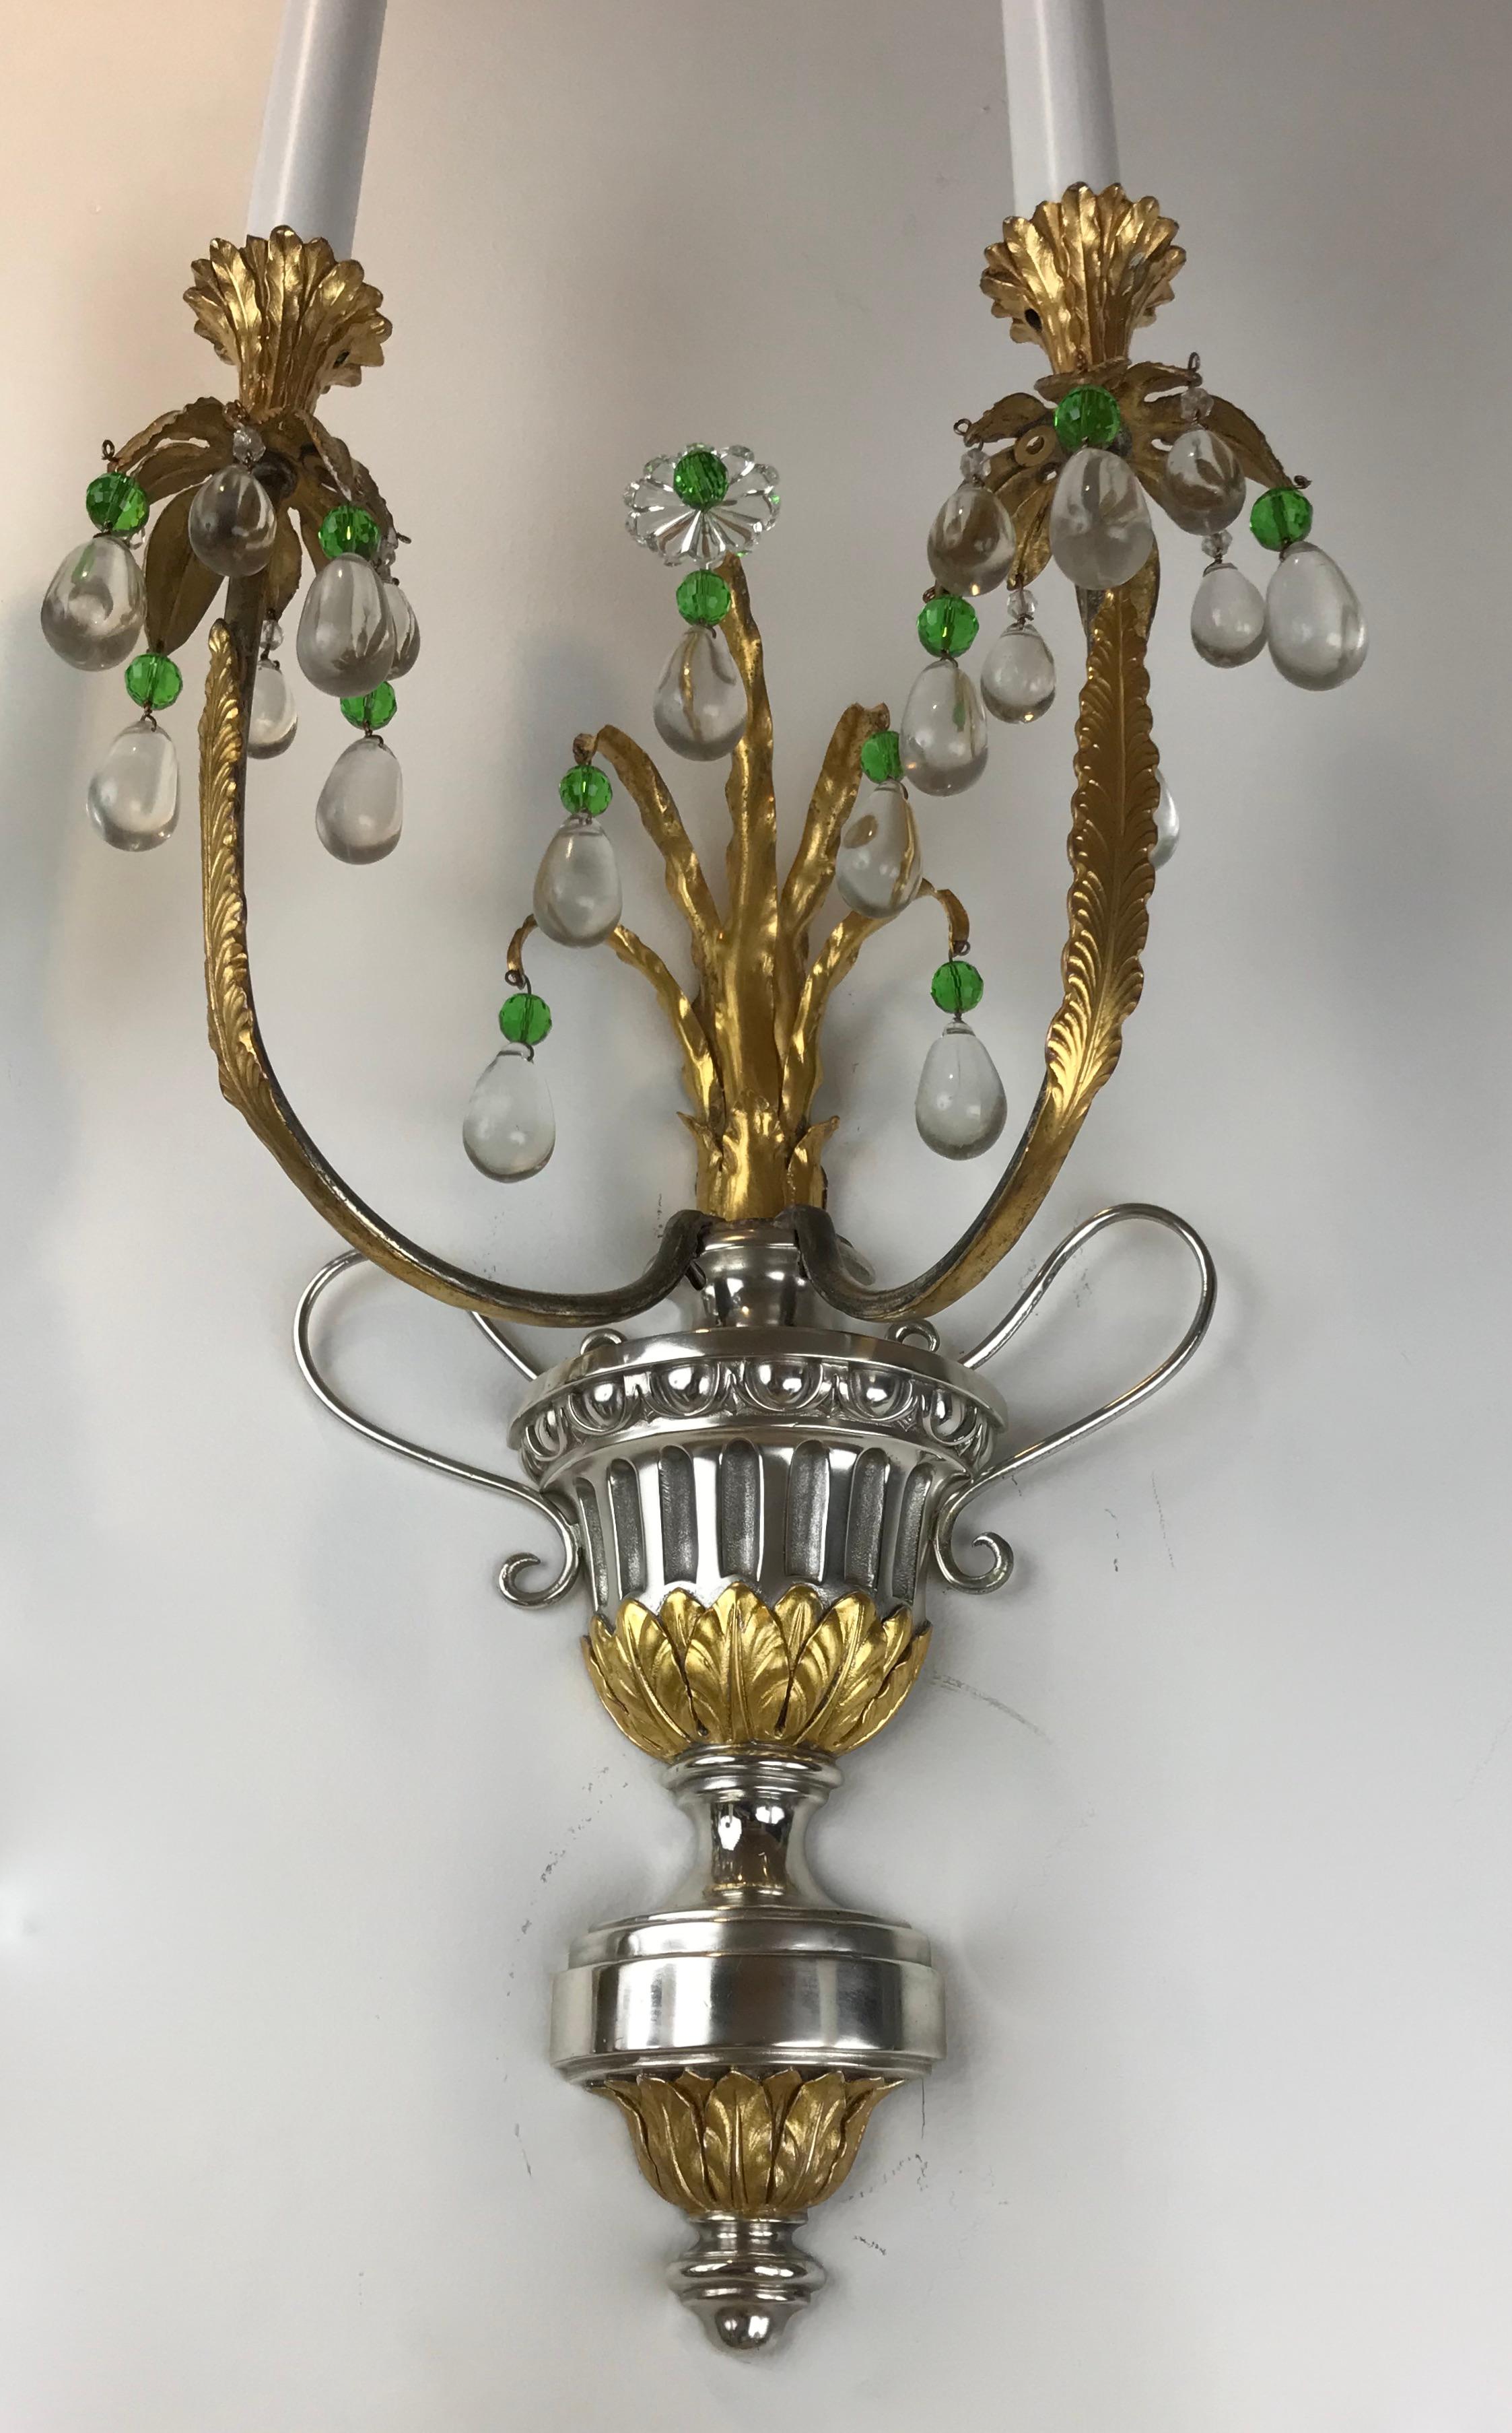  Four Silver and Gilt Bronze Sconces with Green Crystal Accents by Caldwell In Good Condition For Sale In Pittsburgh, PA